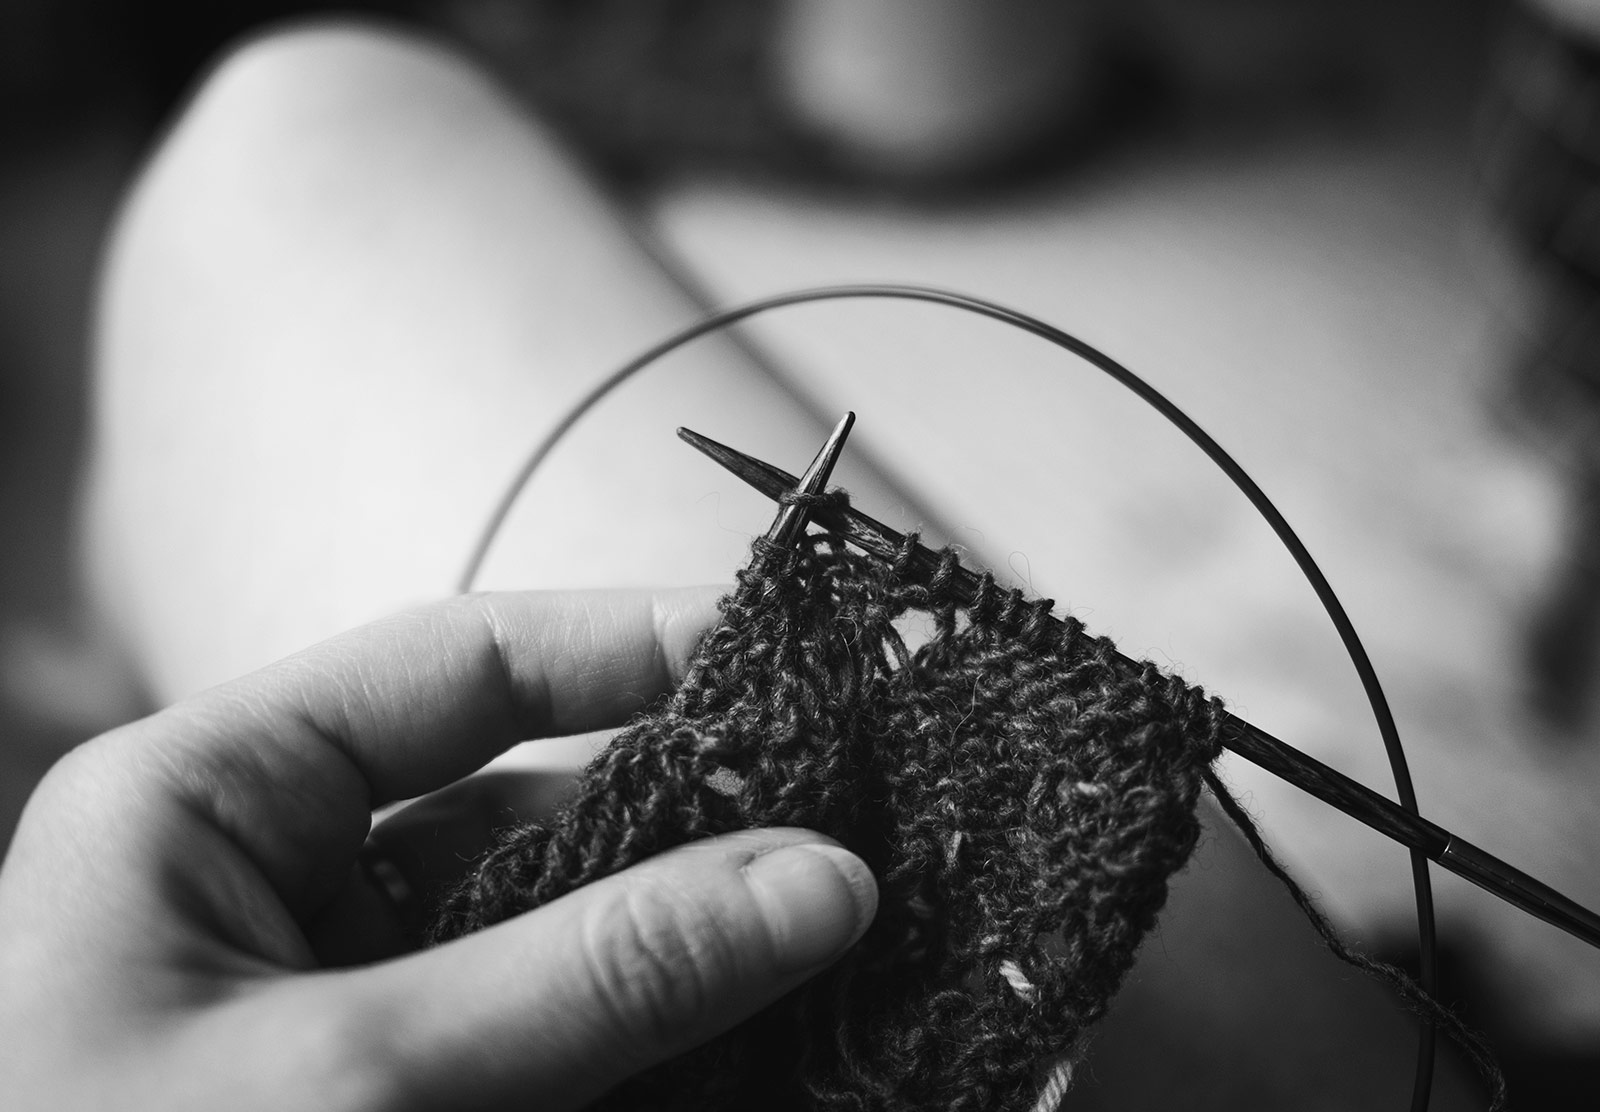 Knitting in hand